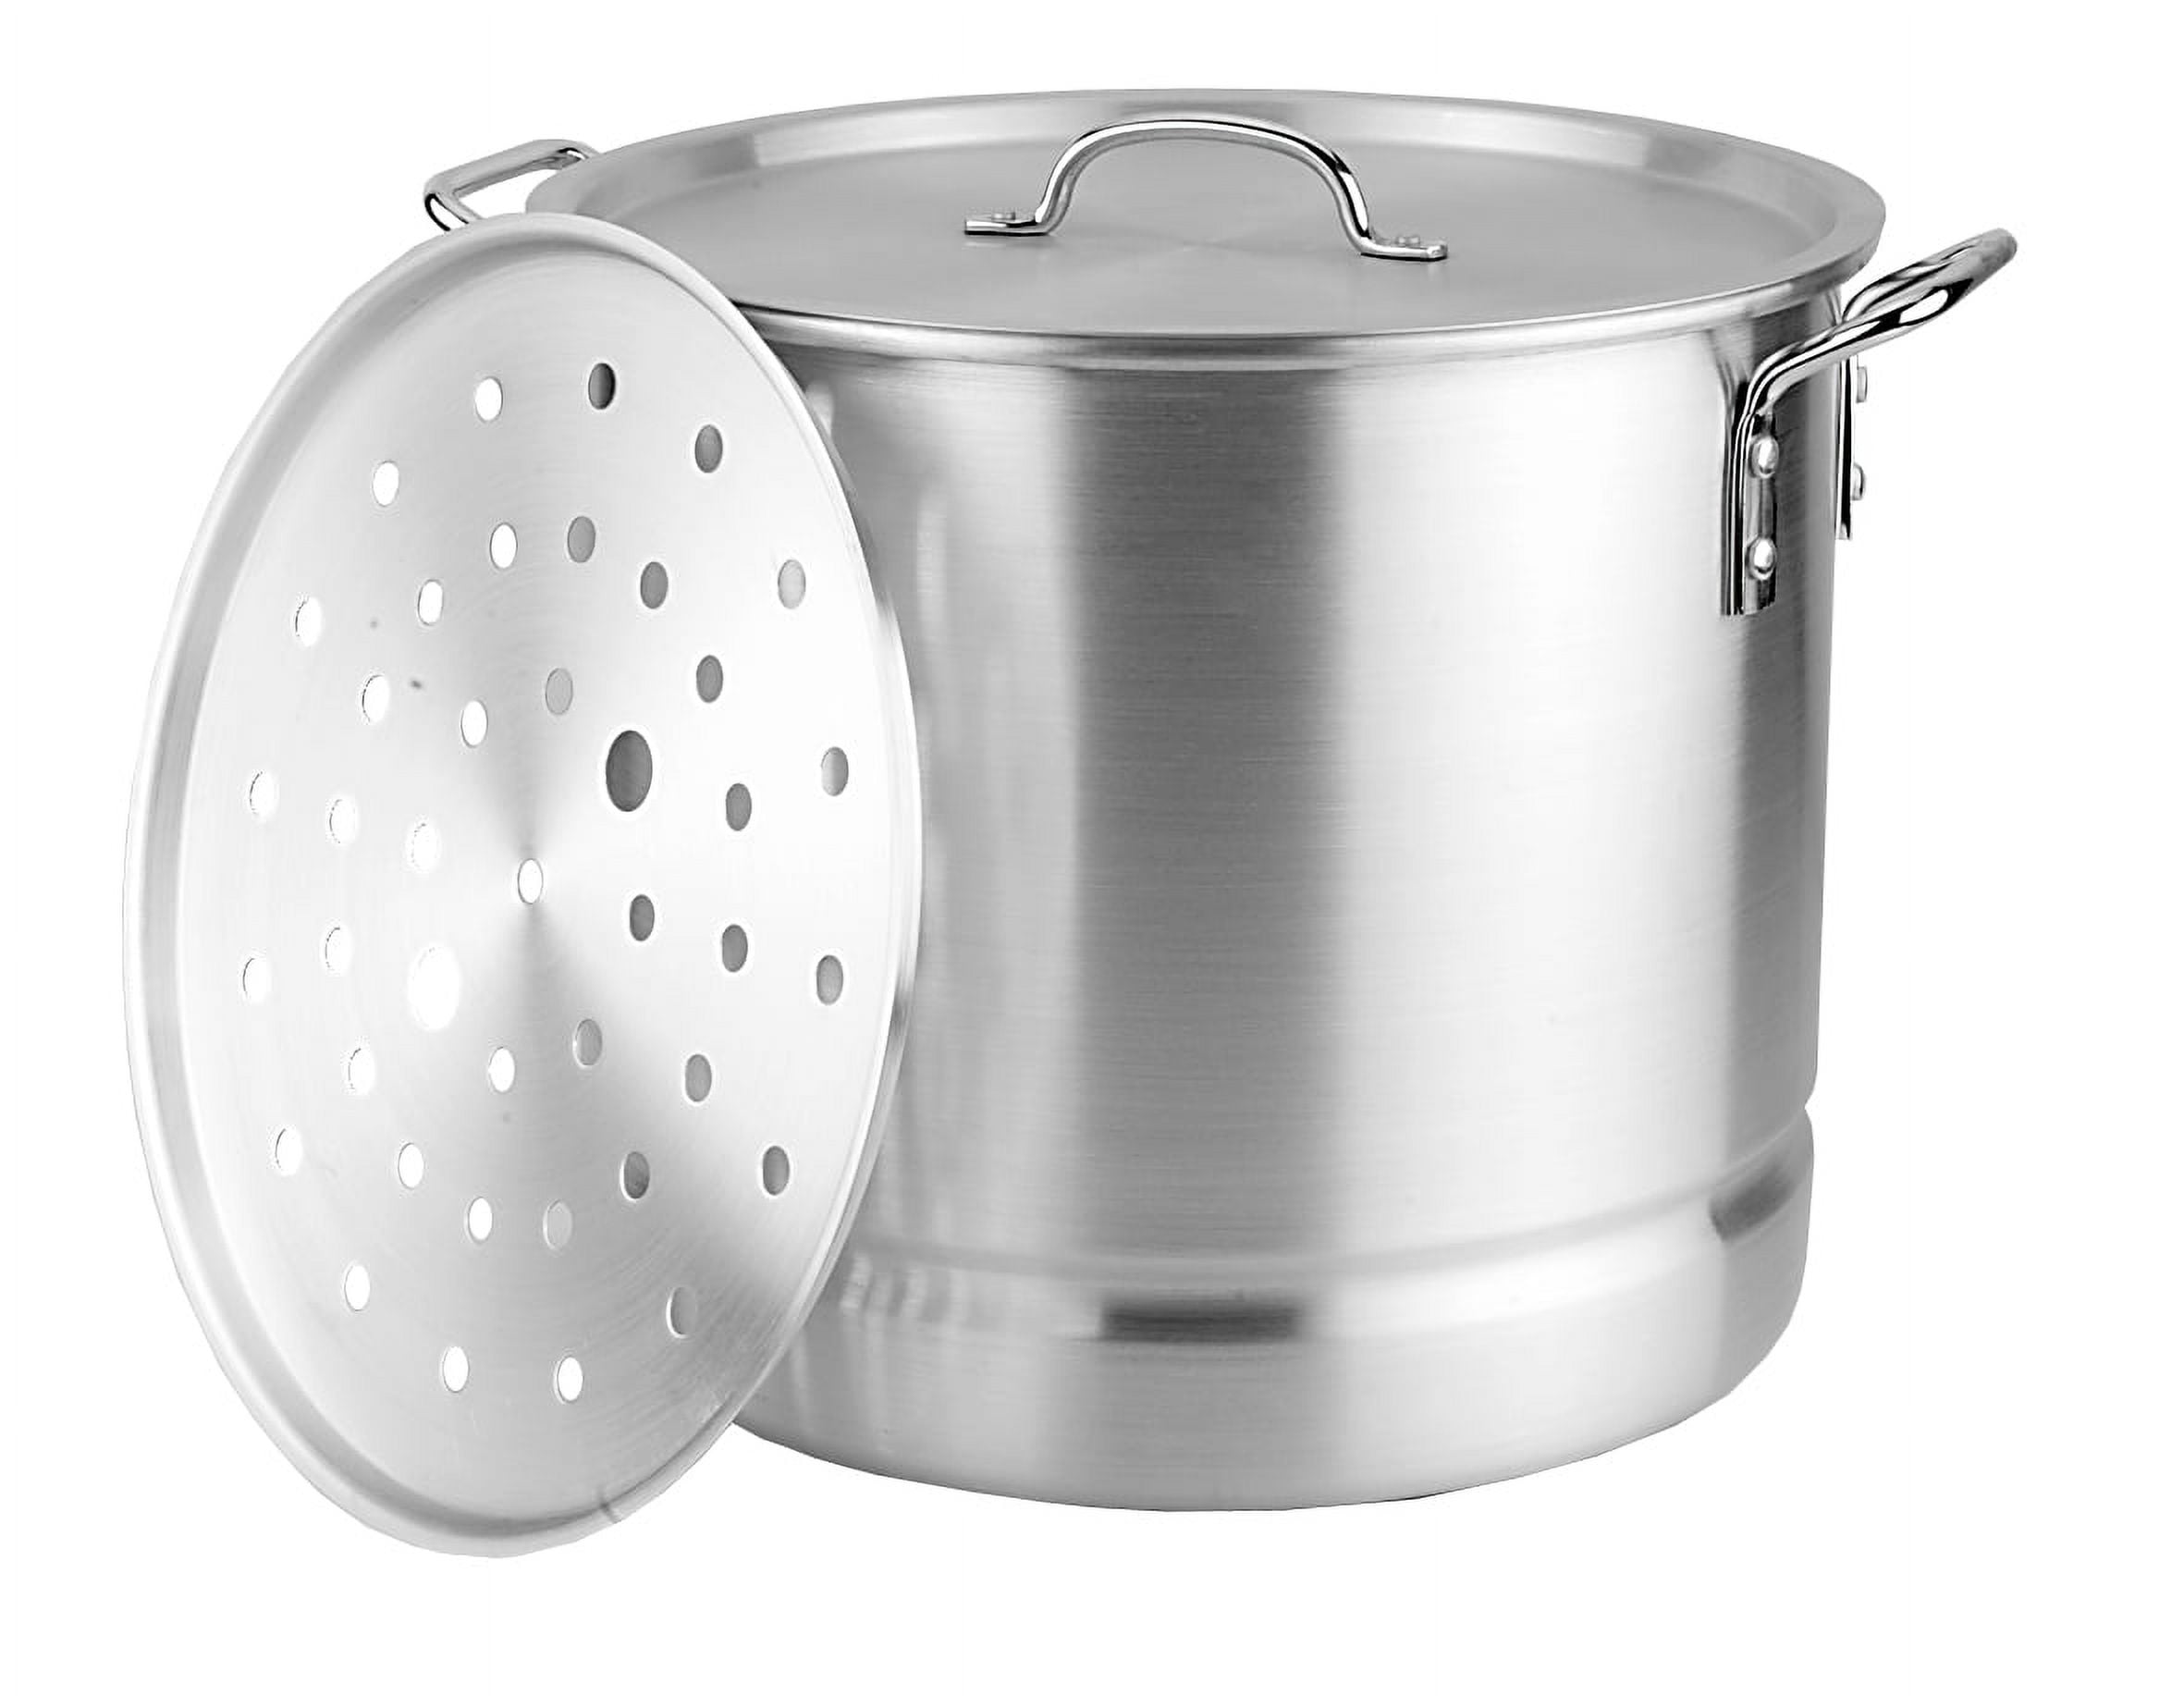 BENTISM Stainless Steel Stockpot 42qt Cooking Kitchen Sauce Pot